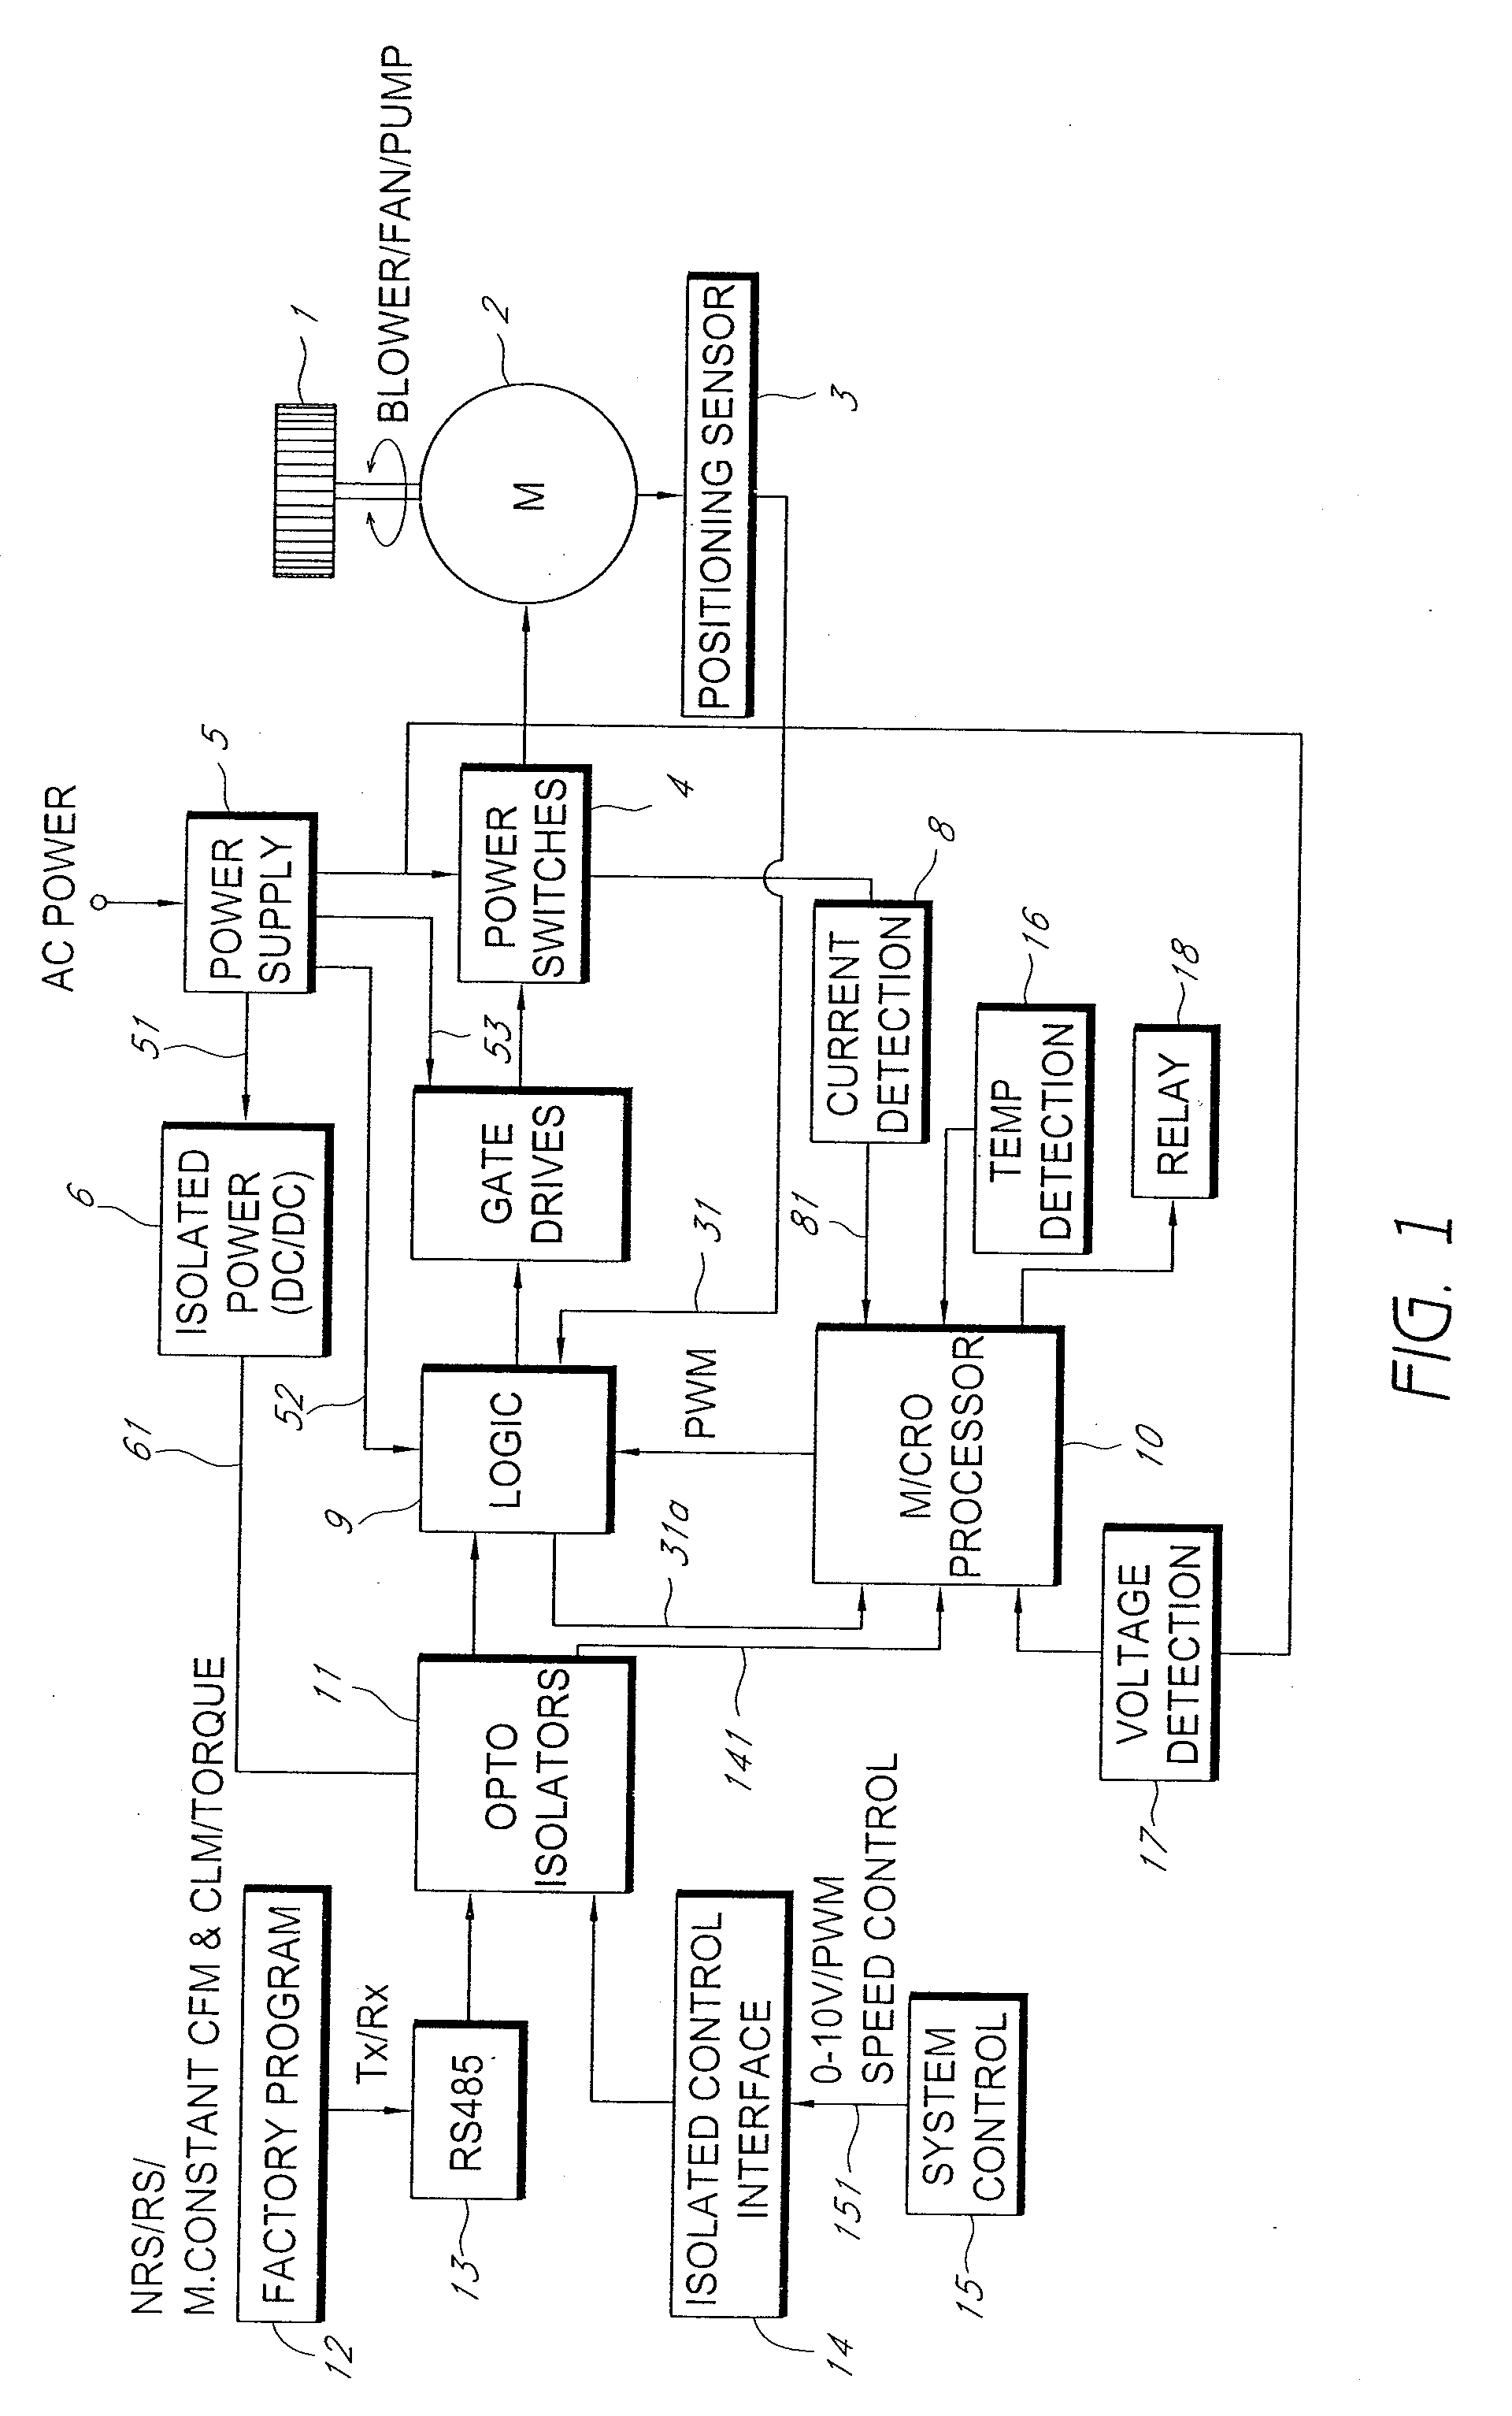 Phase logic circuits for controlling motors